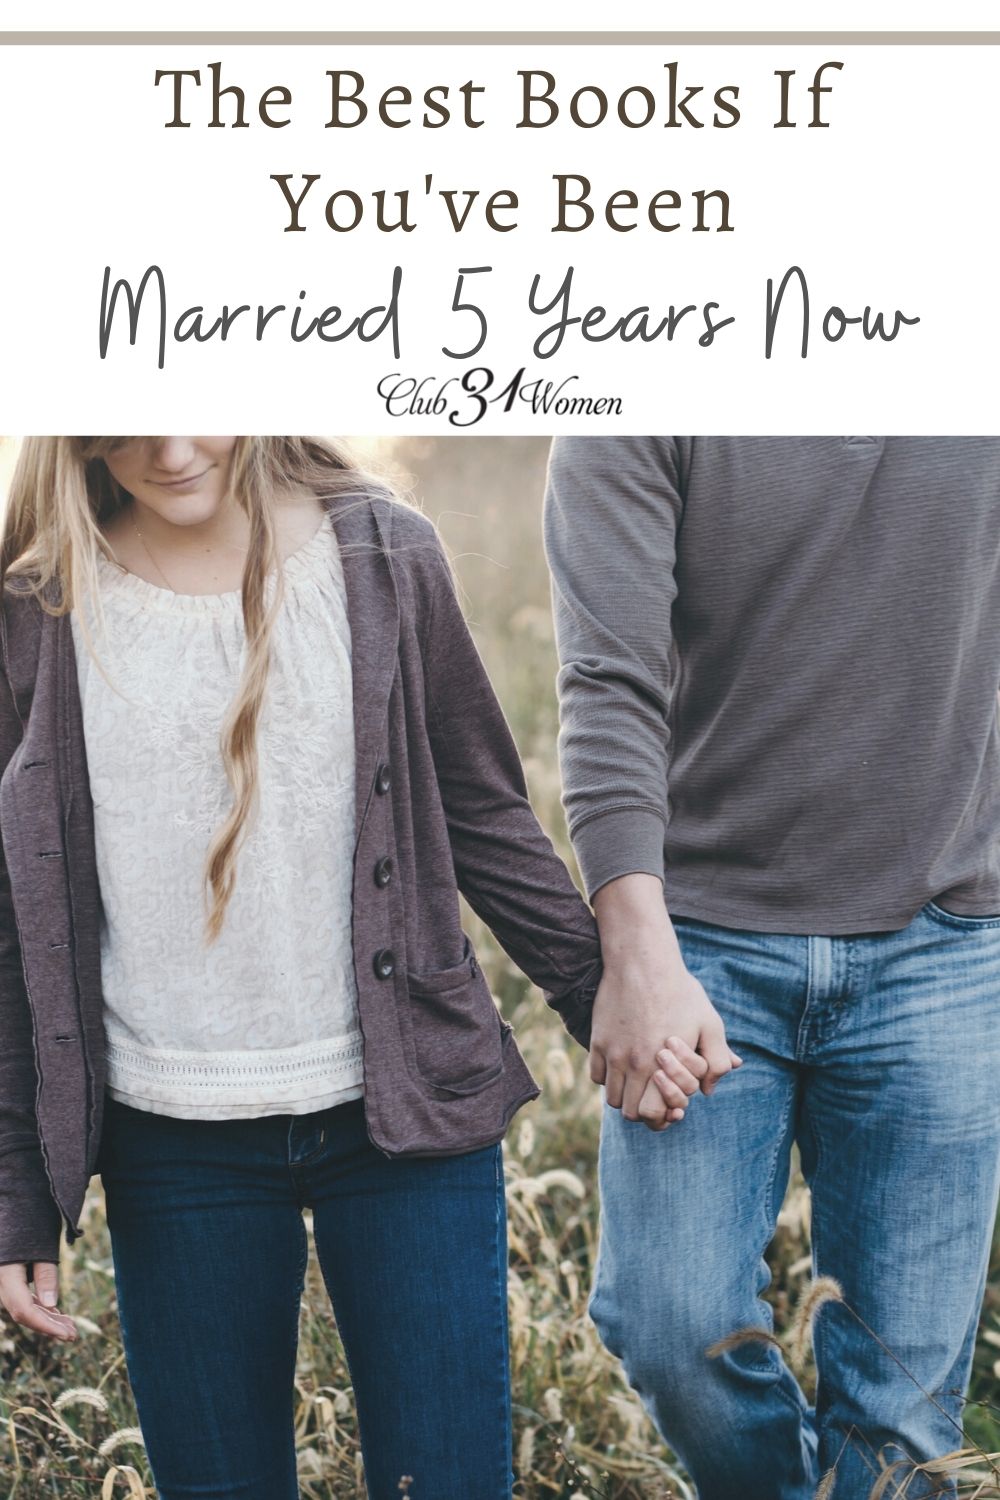 Once you've settled into a new life of being married it's a great time to begin being intentional and these books are rich with wisdom! via @Club31Women